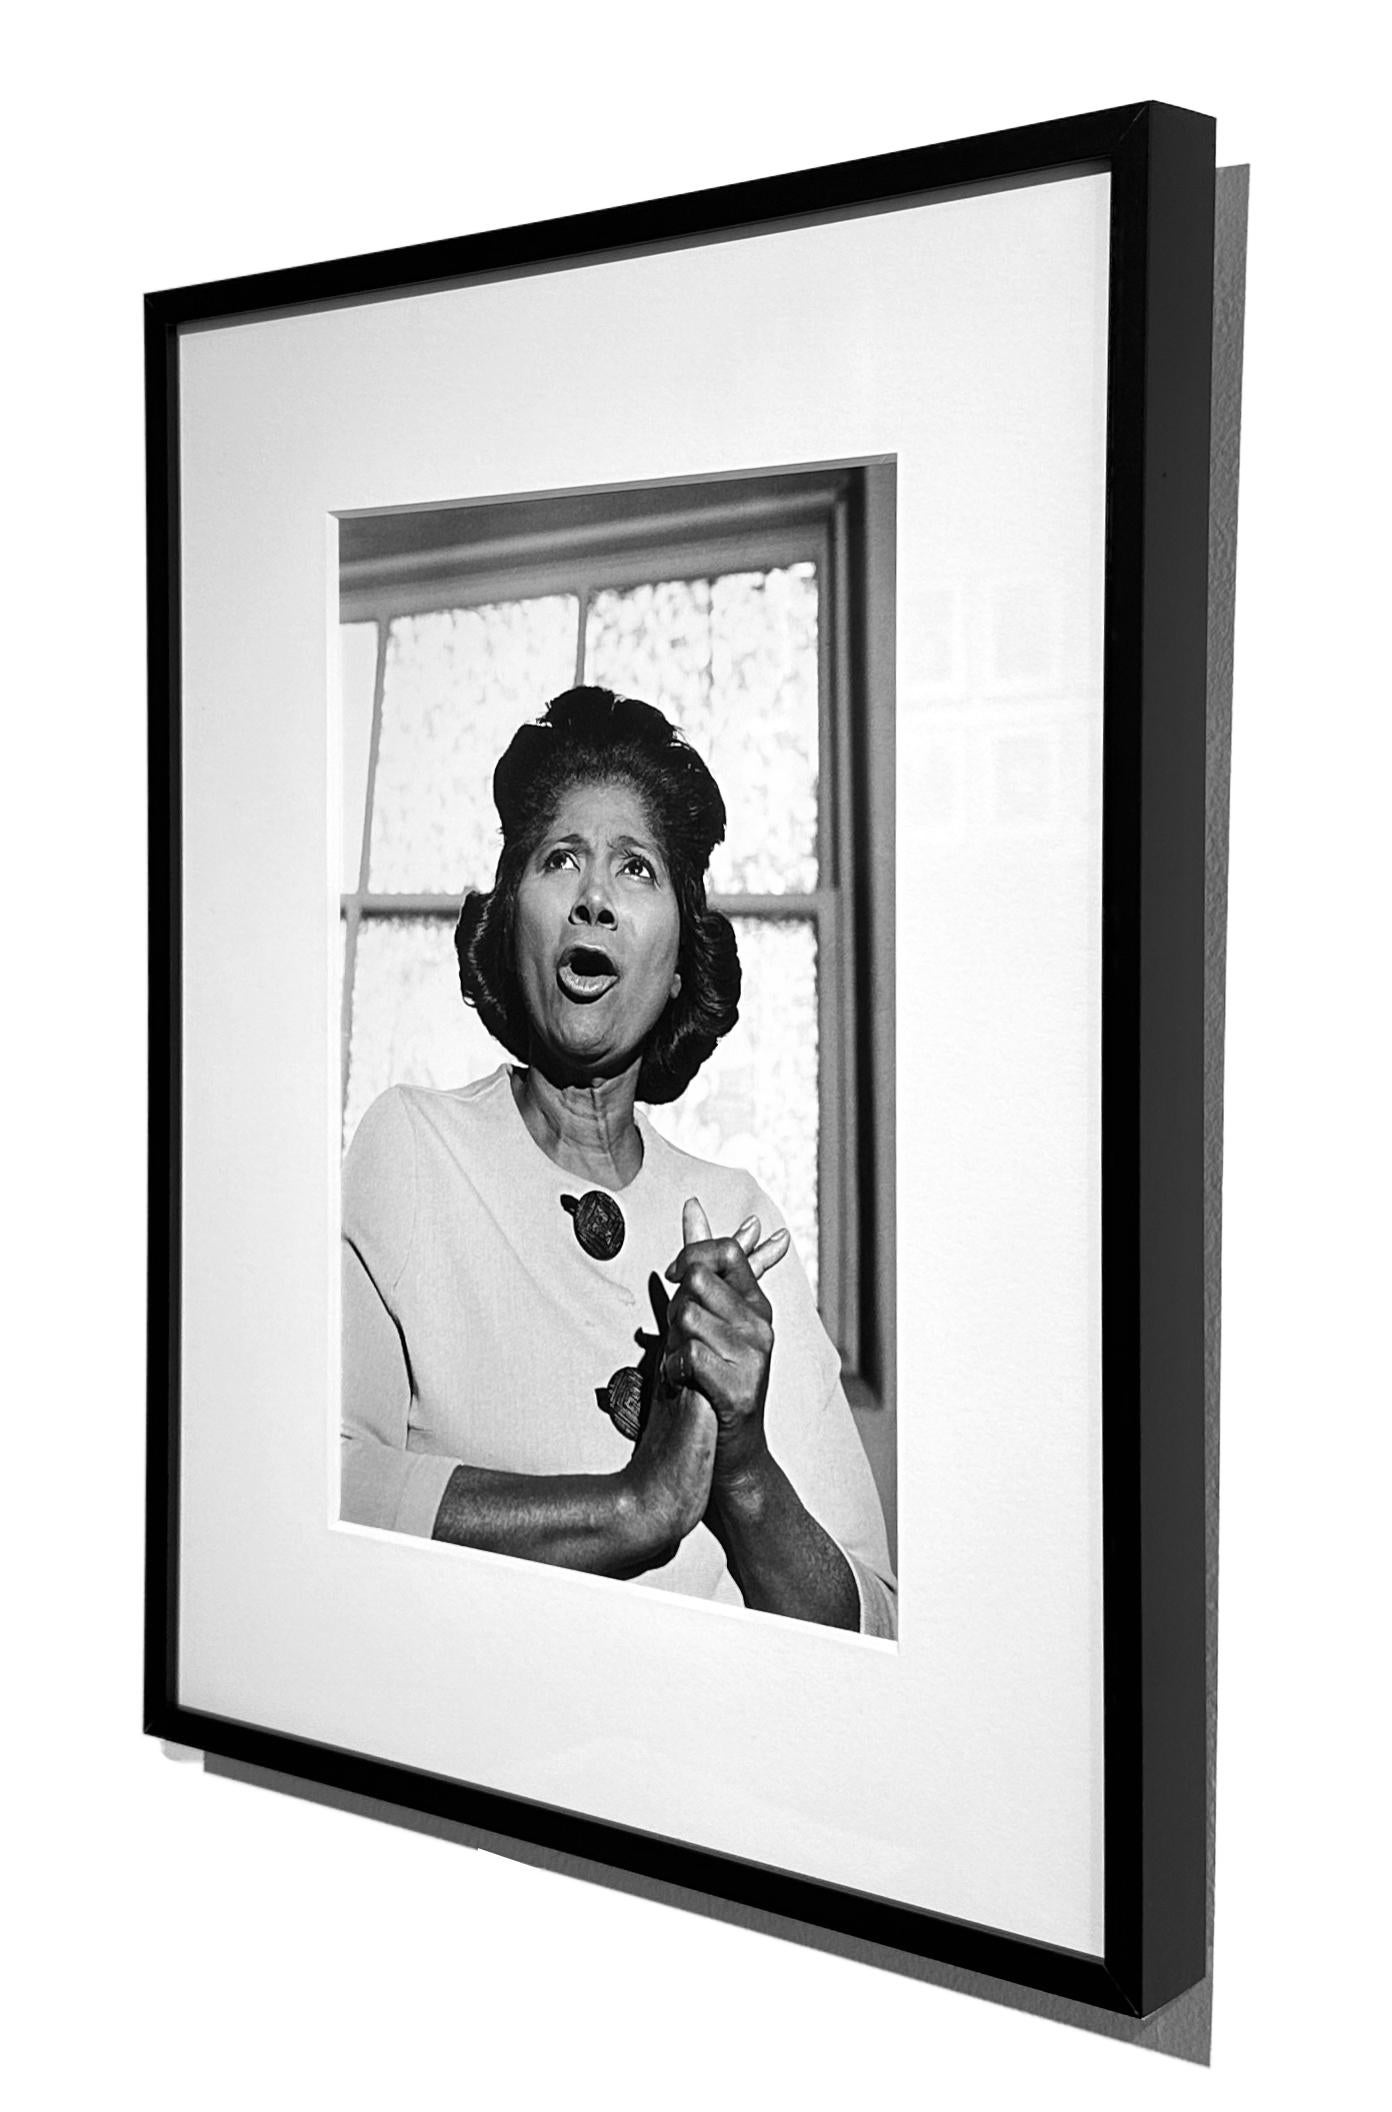 Art Shay photographed Mahalia Jackson singing-in-motion in the basement of her house in the late 1950's.  His image captures Jackson's dynamic approach to music as a form of personal liberation.  